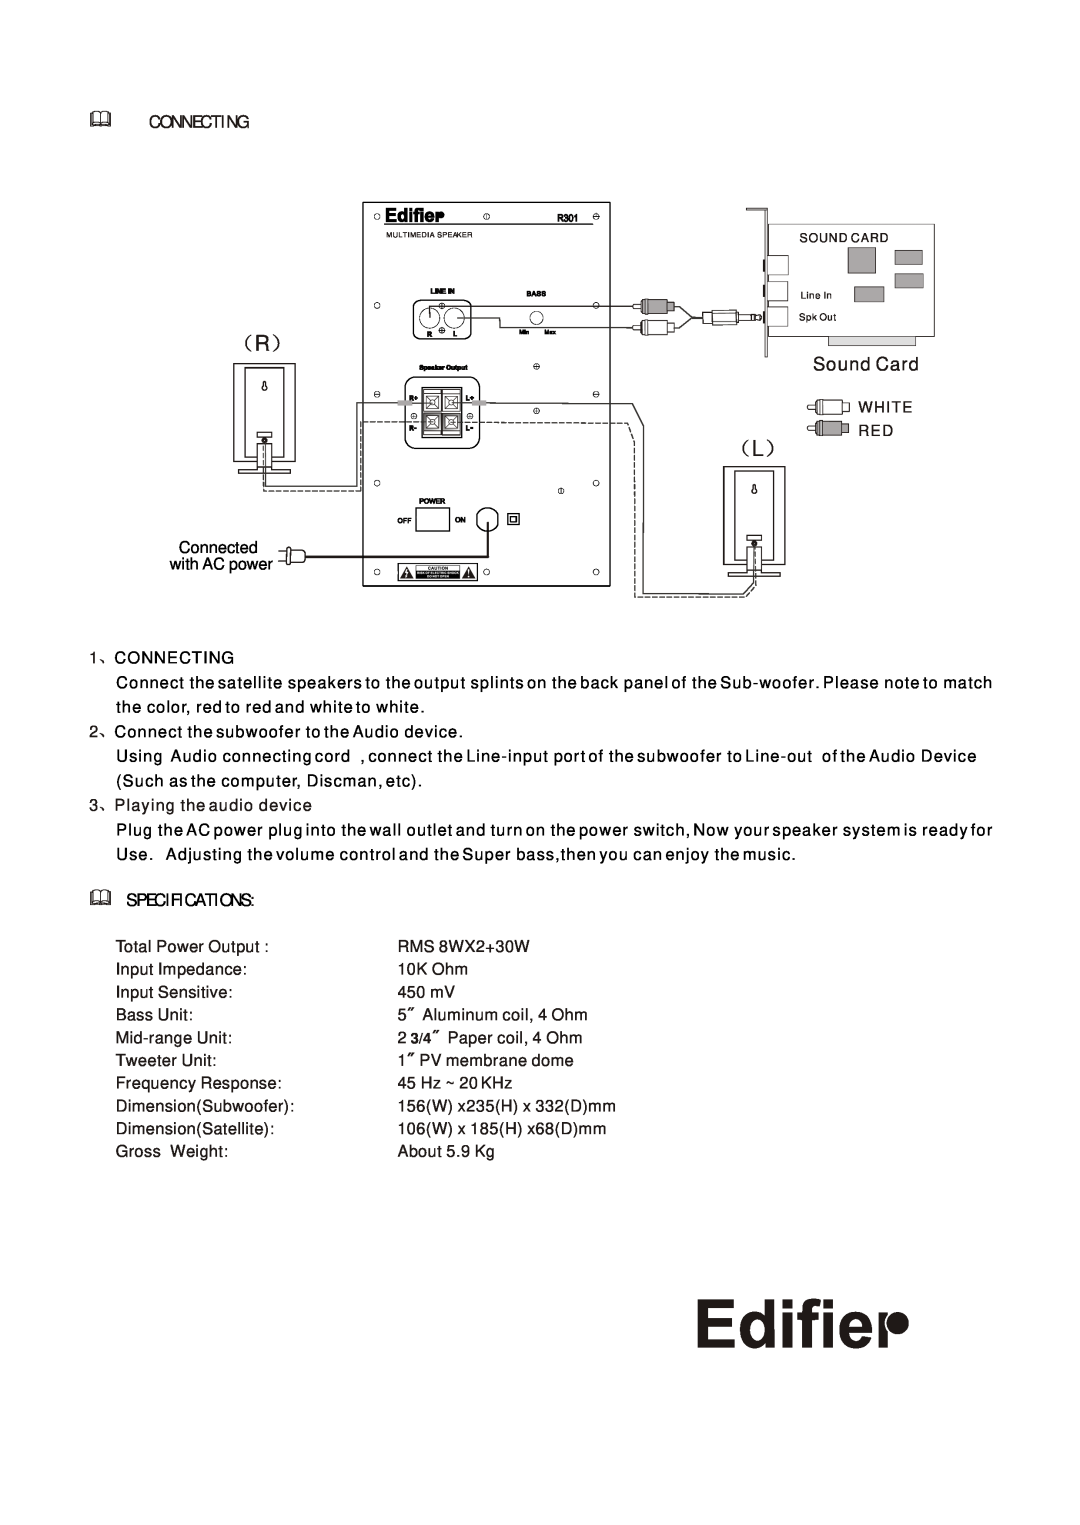 Edifier Enterprises Canada R301 user manual Connecting, Specifications, Sound Card 